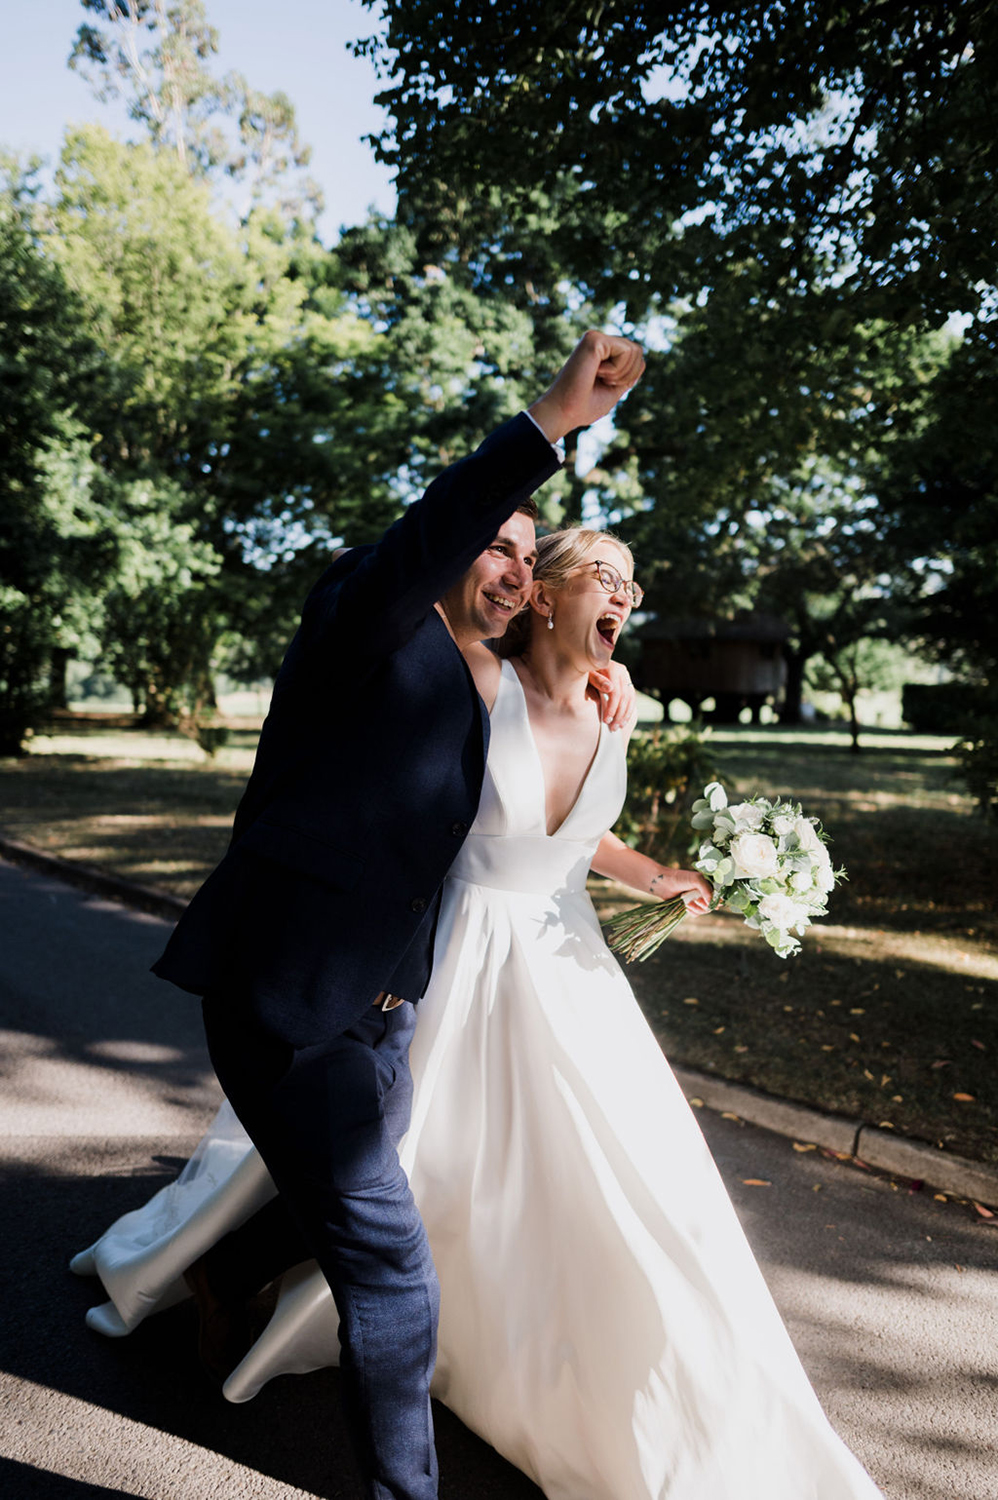 Liberty Pearl Photo & Film Collective Devon Wedding Photography at Deer Park Country House. Bride and groom celebrate holding flowers. 